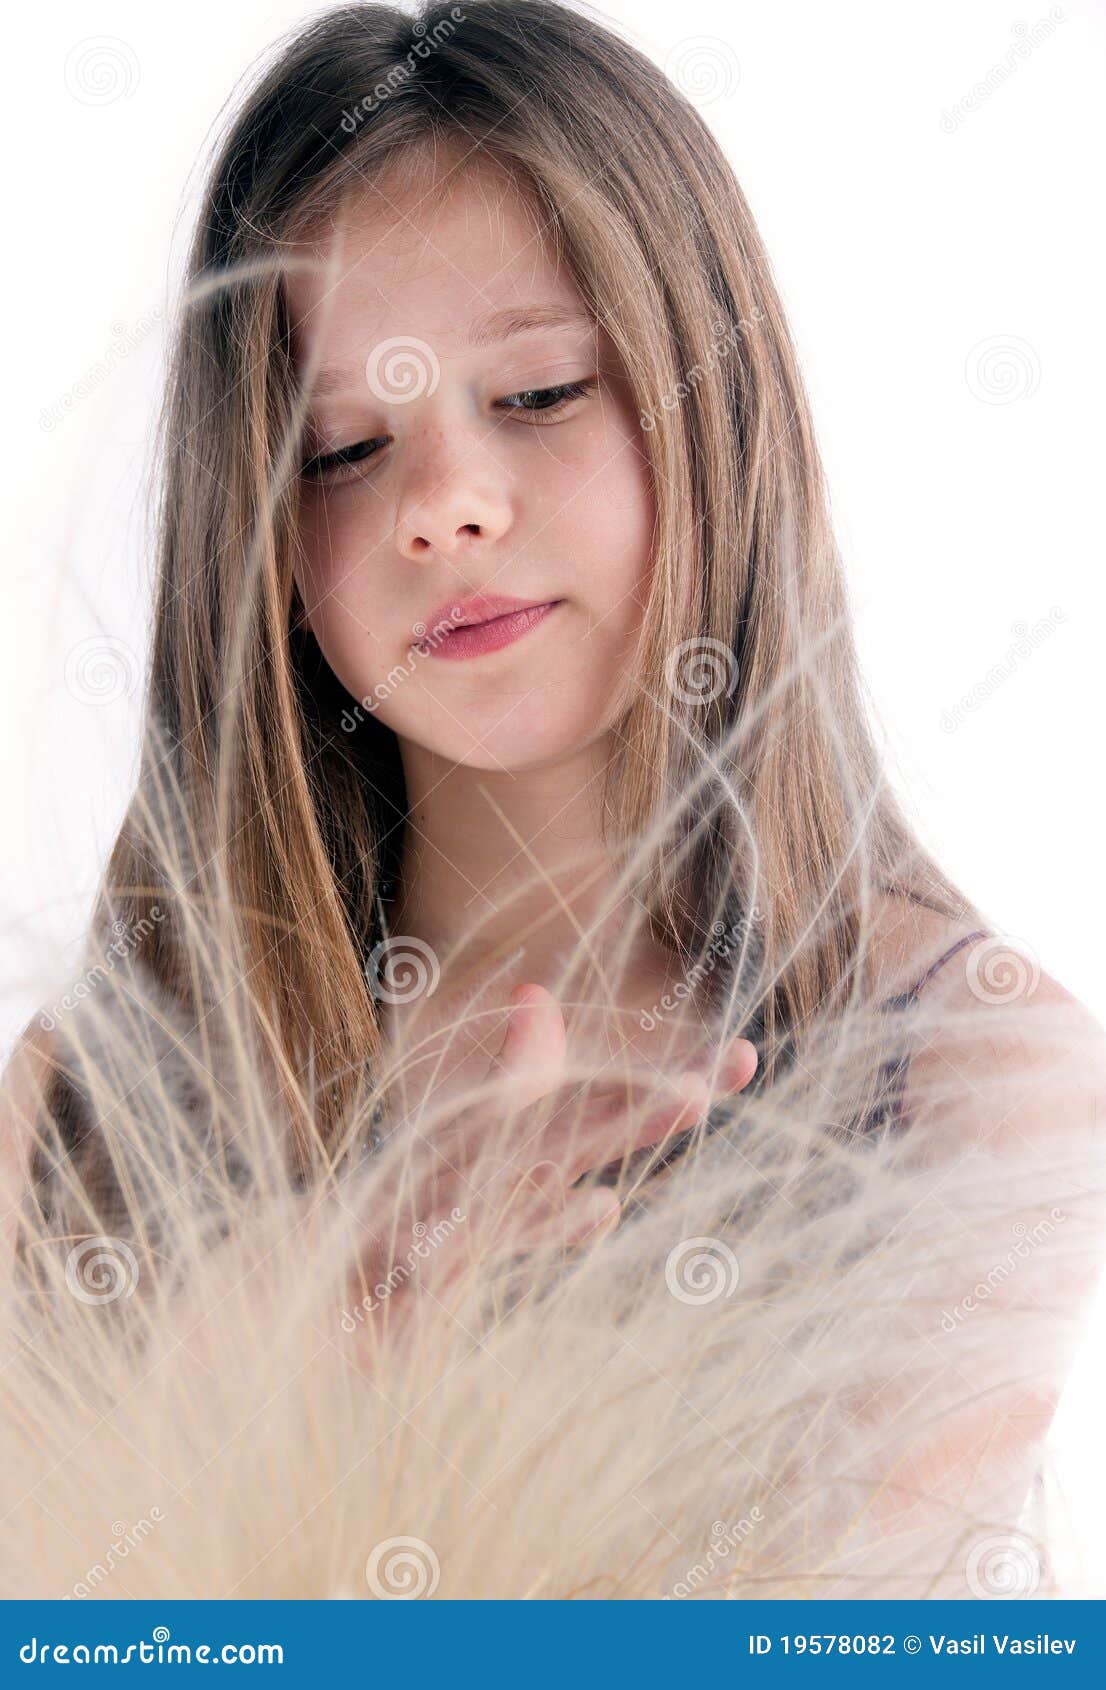 Dreaming Little Girl Stock Photography - Image: 19578082